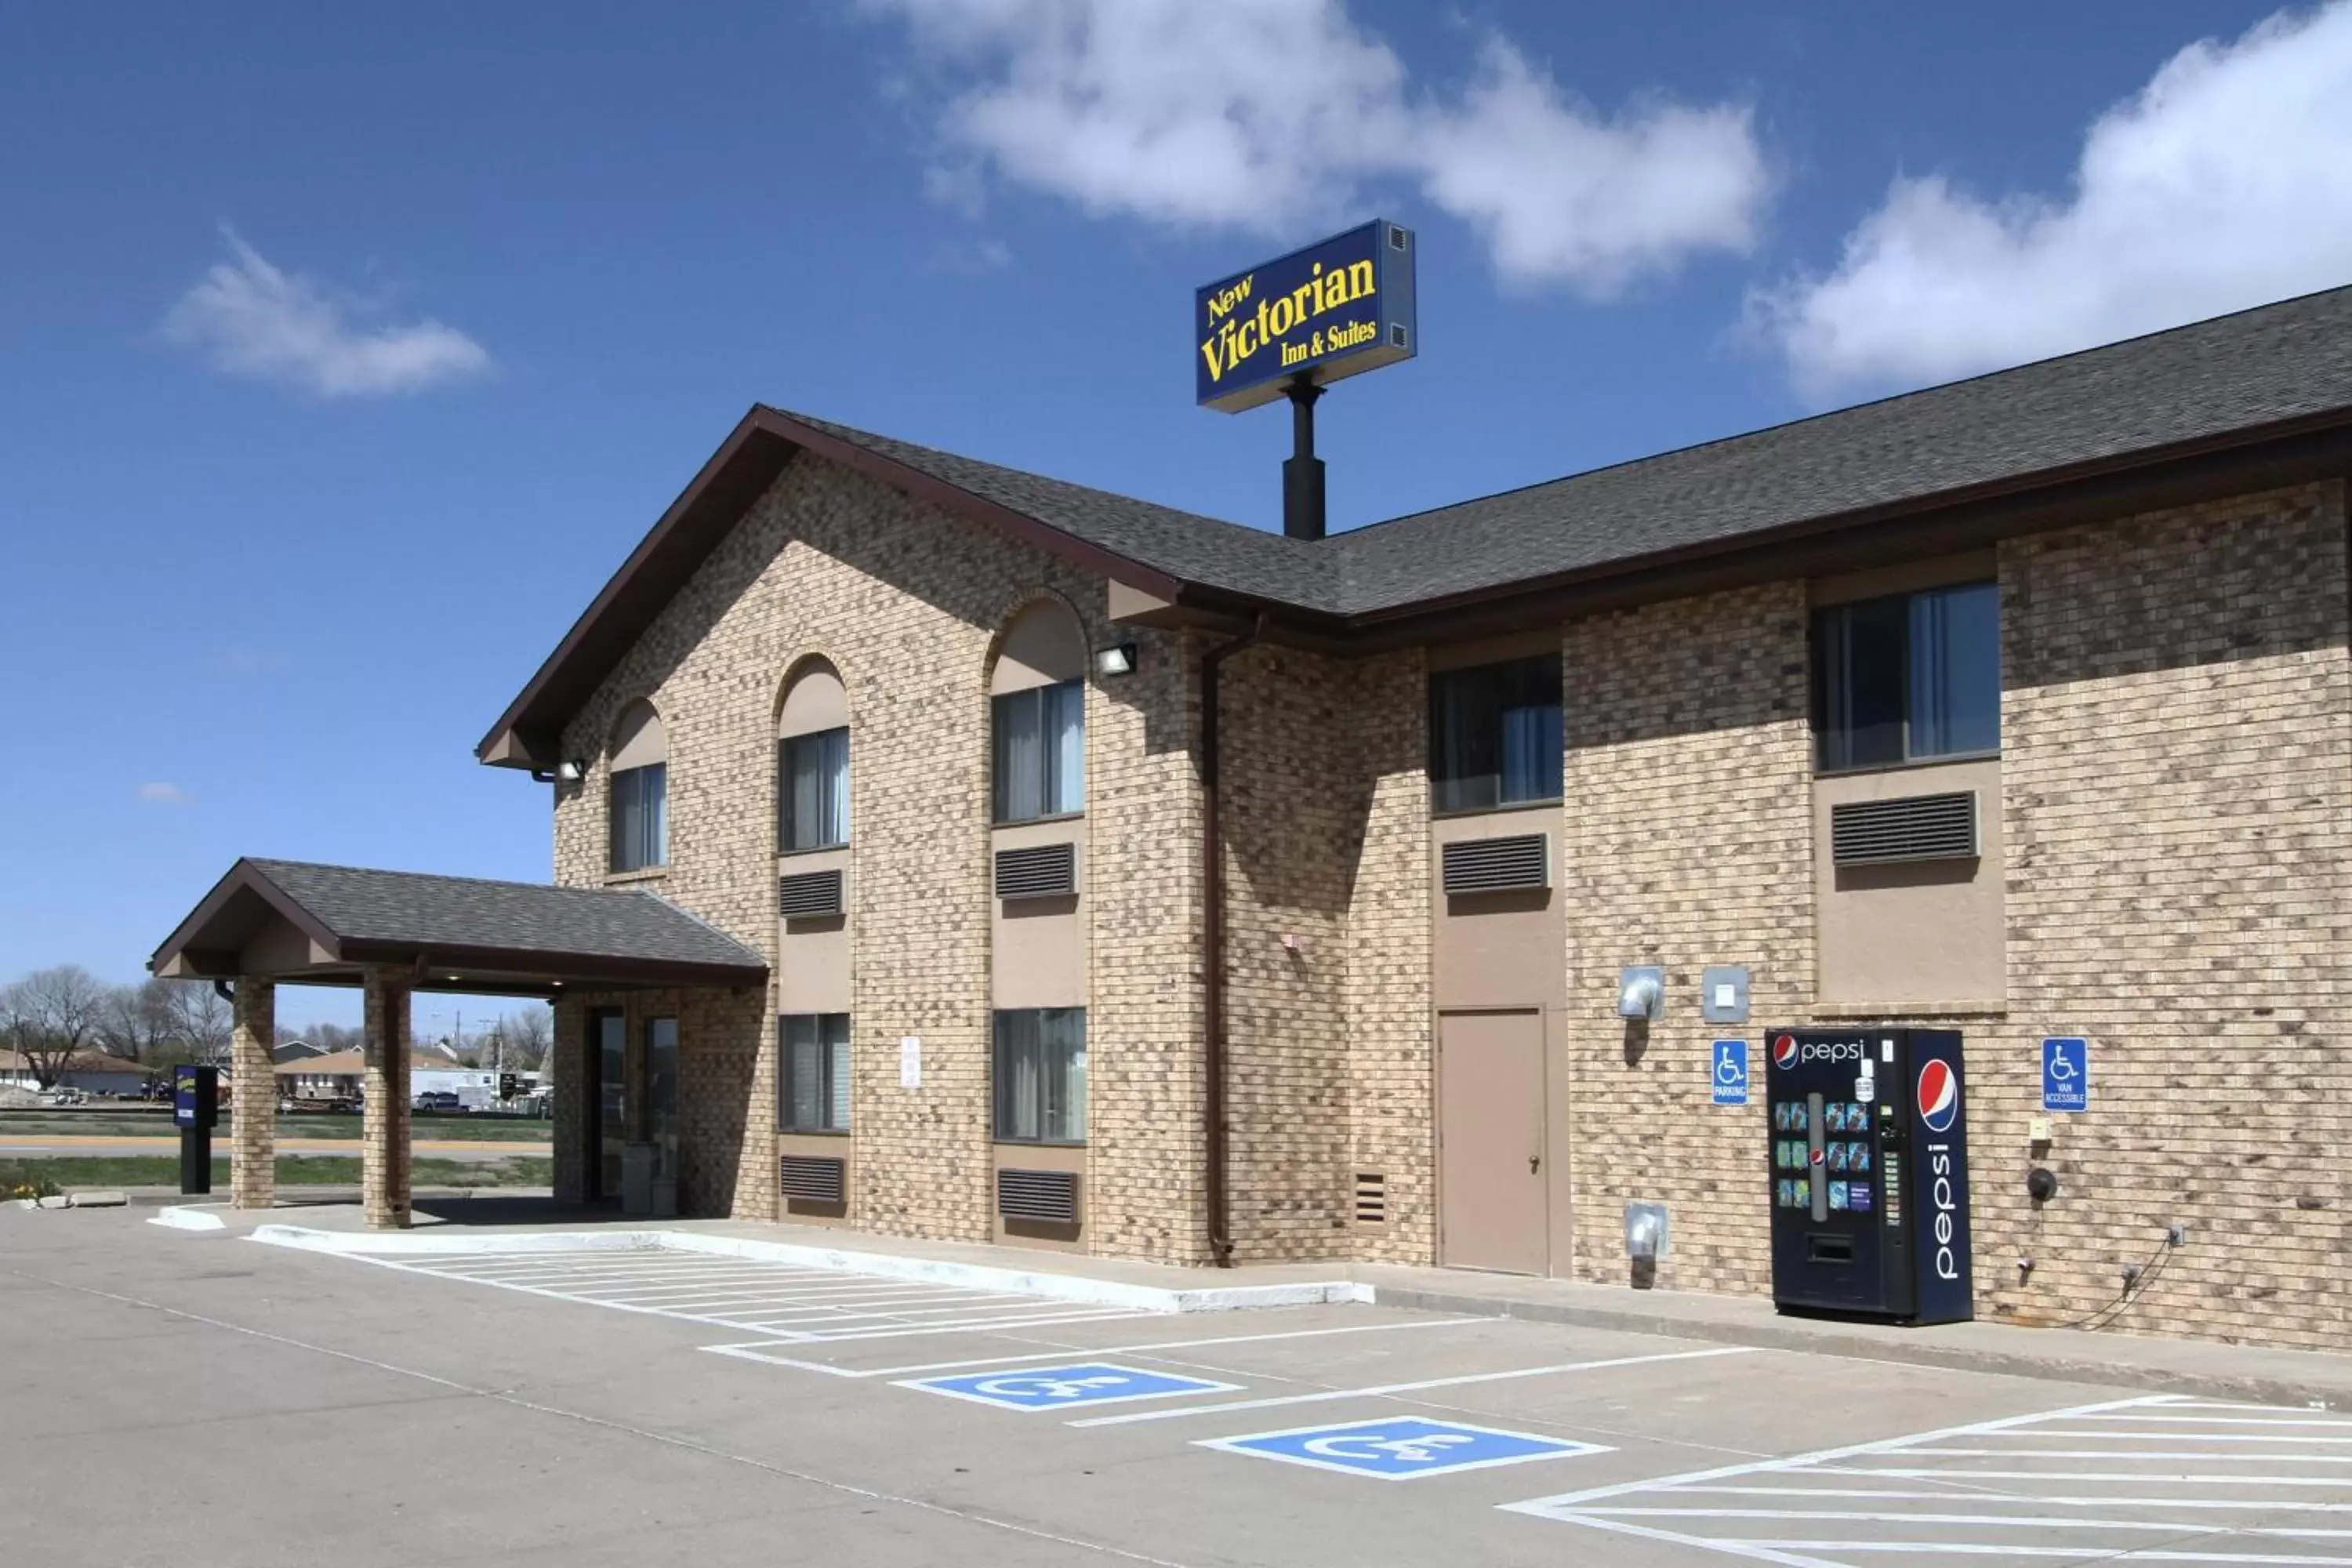 Area and facilities, Property Building in New Victorian Inn & Suites Kearney